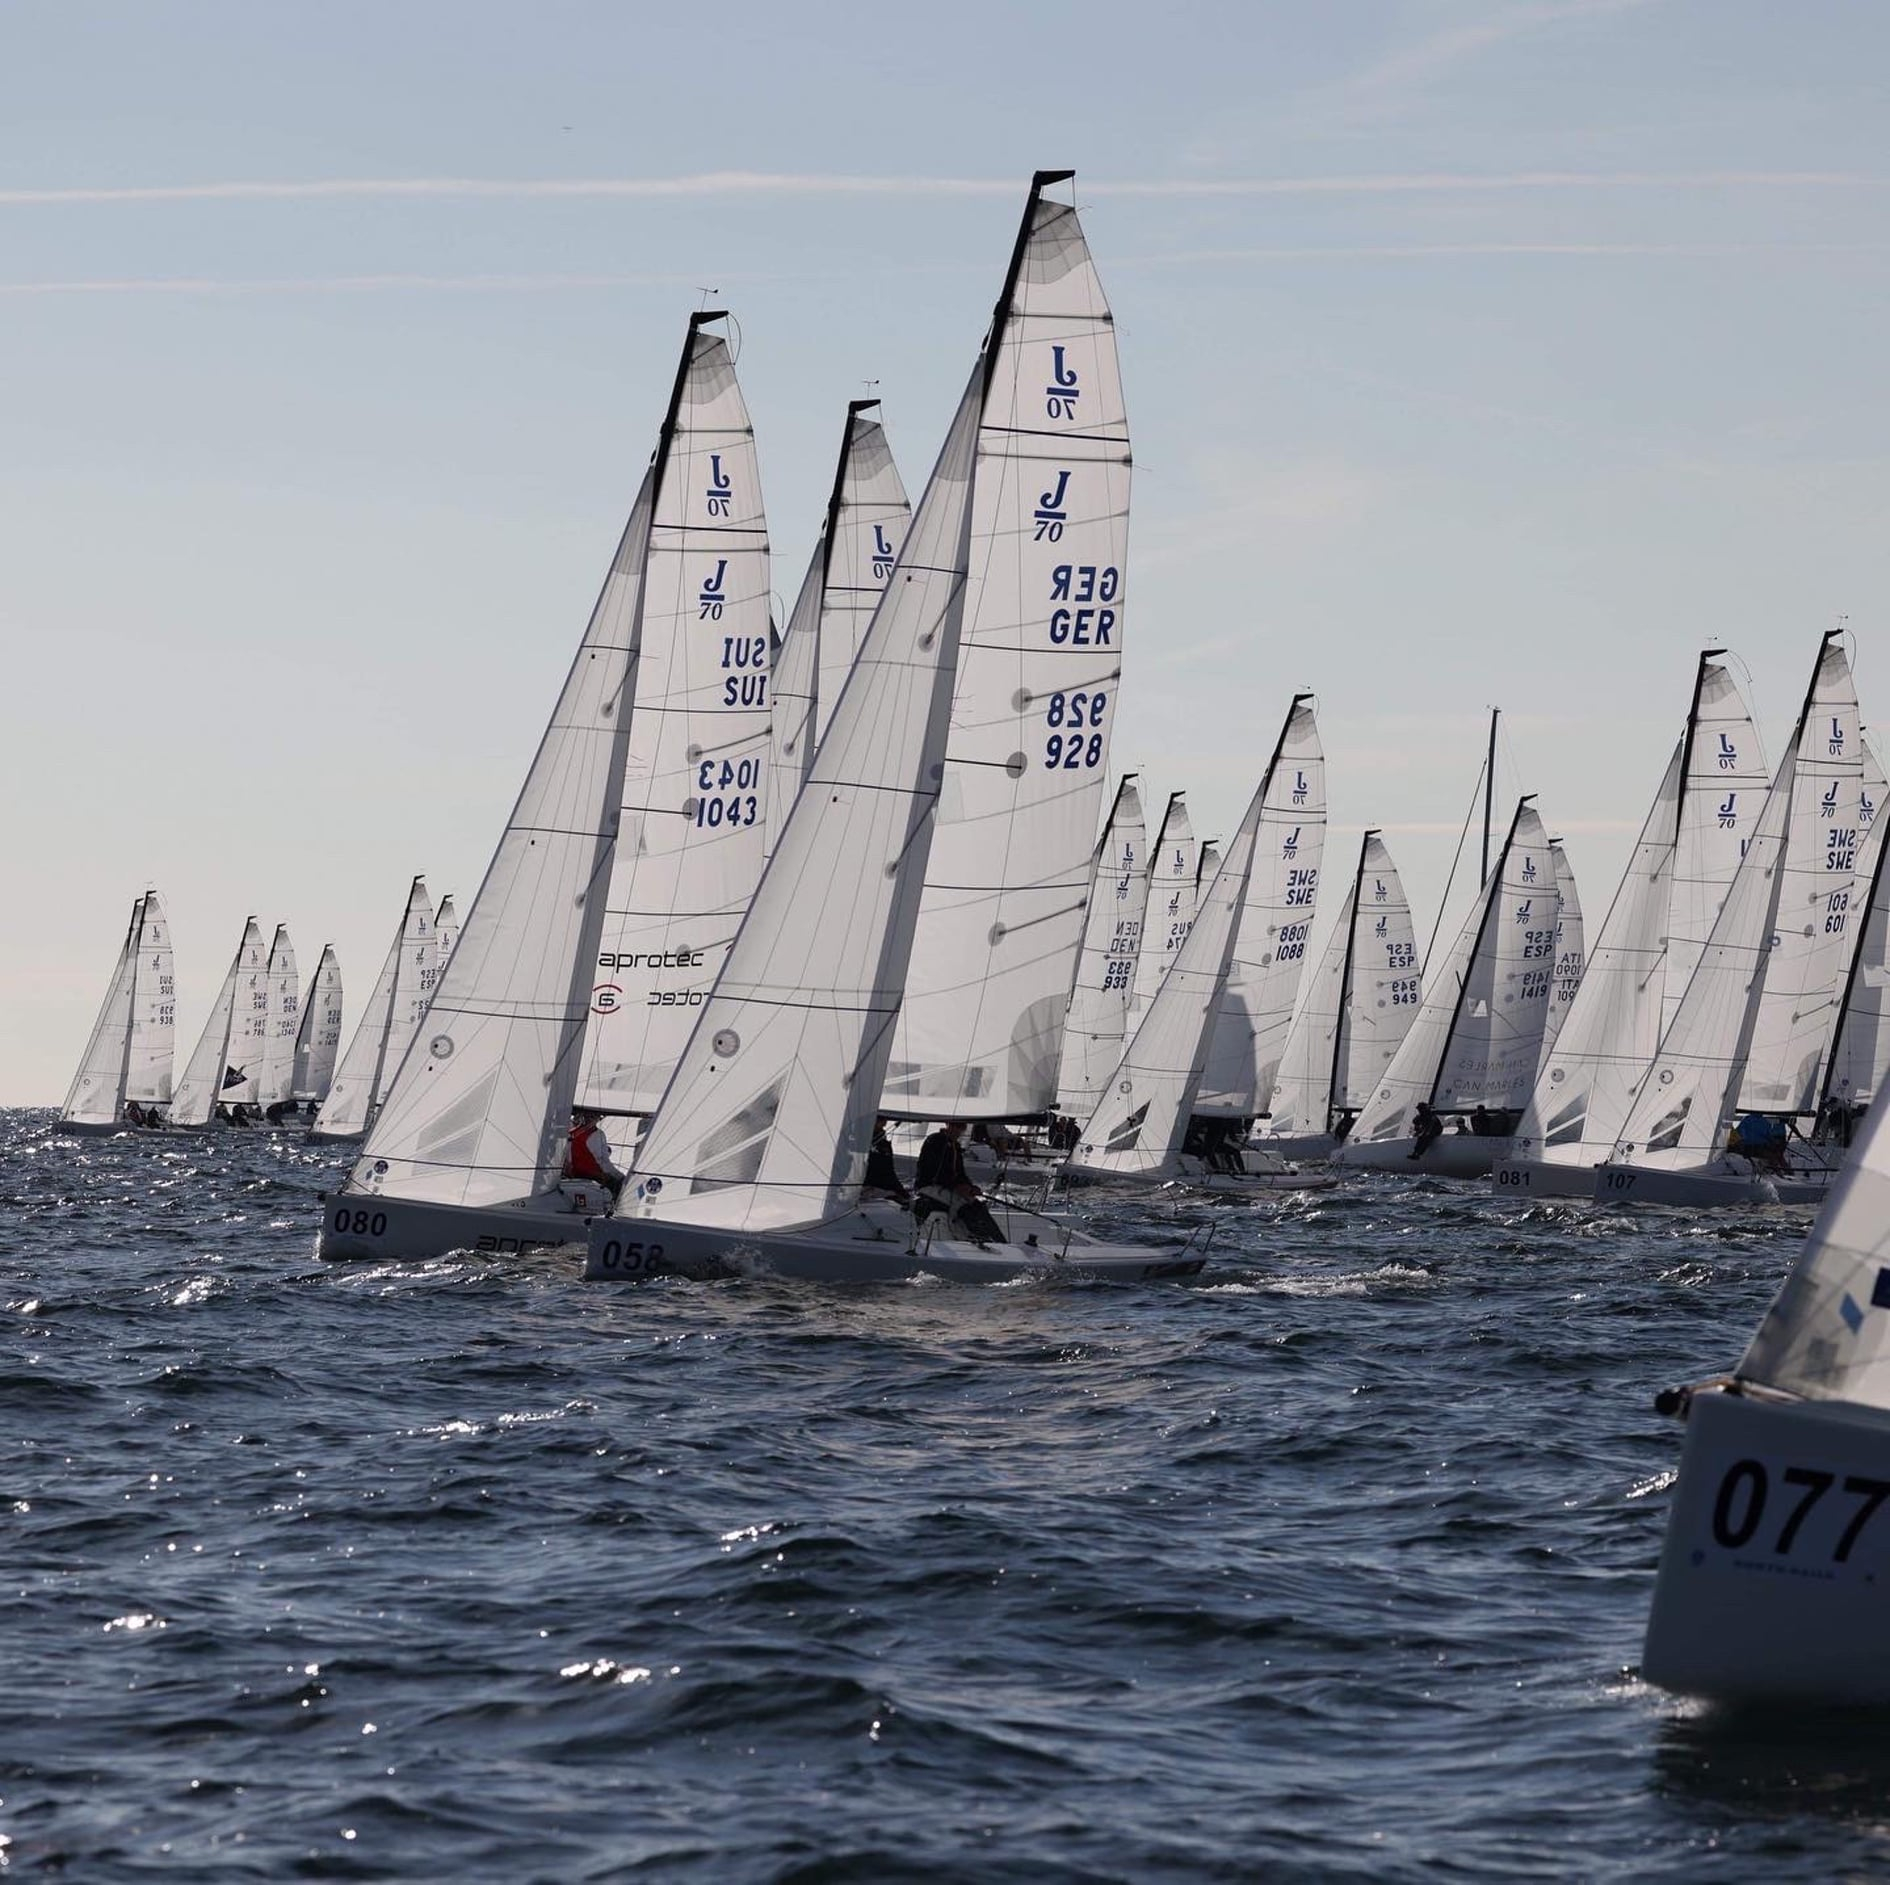  J/70  European Championship 2022  Hyeres FRA  First races today